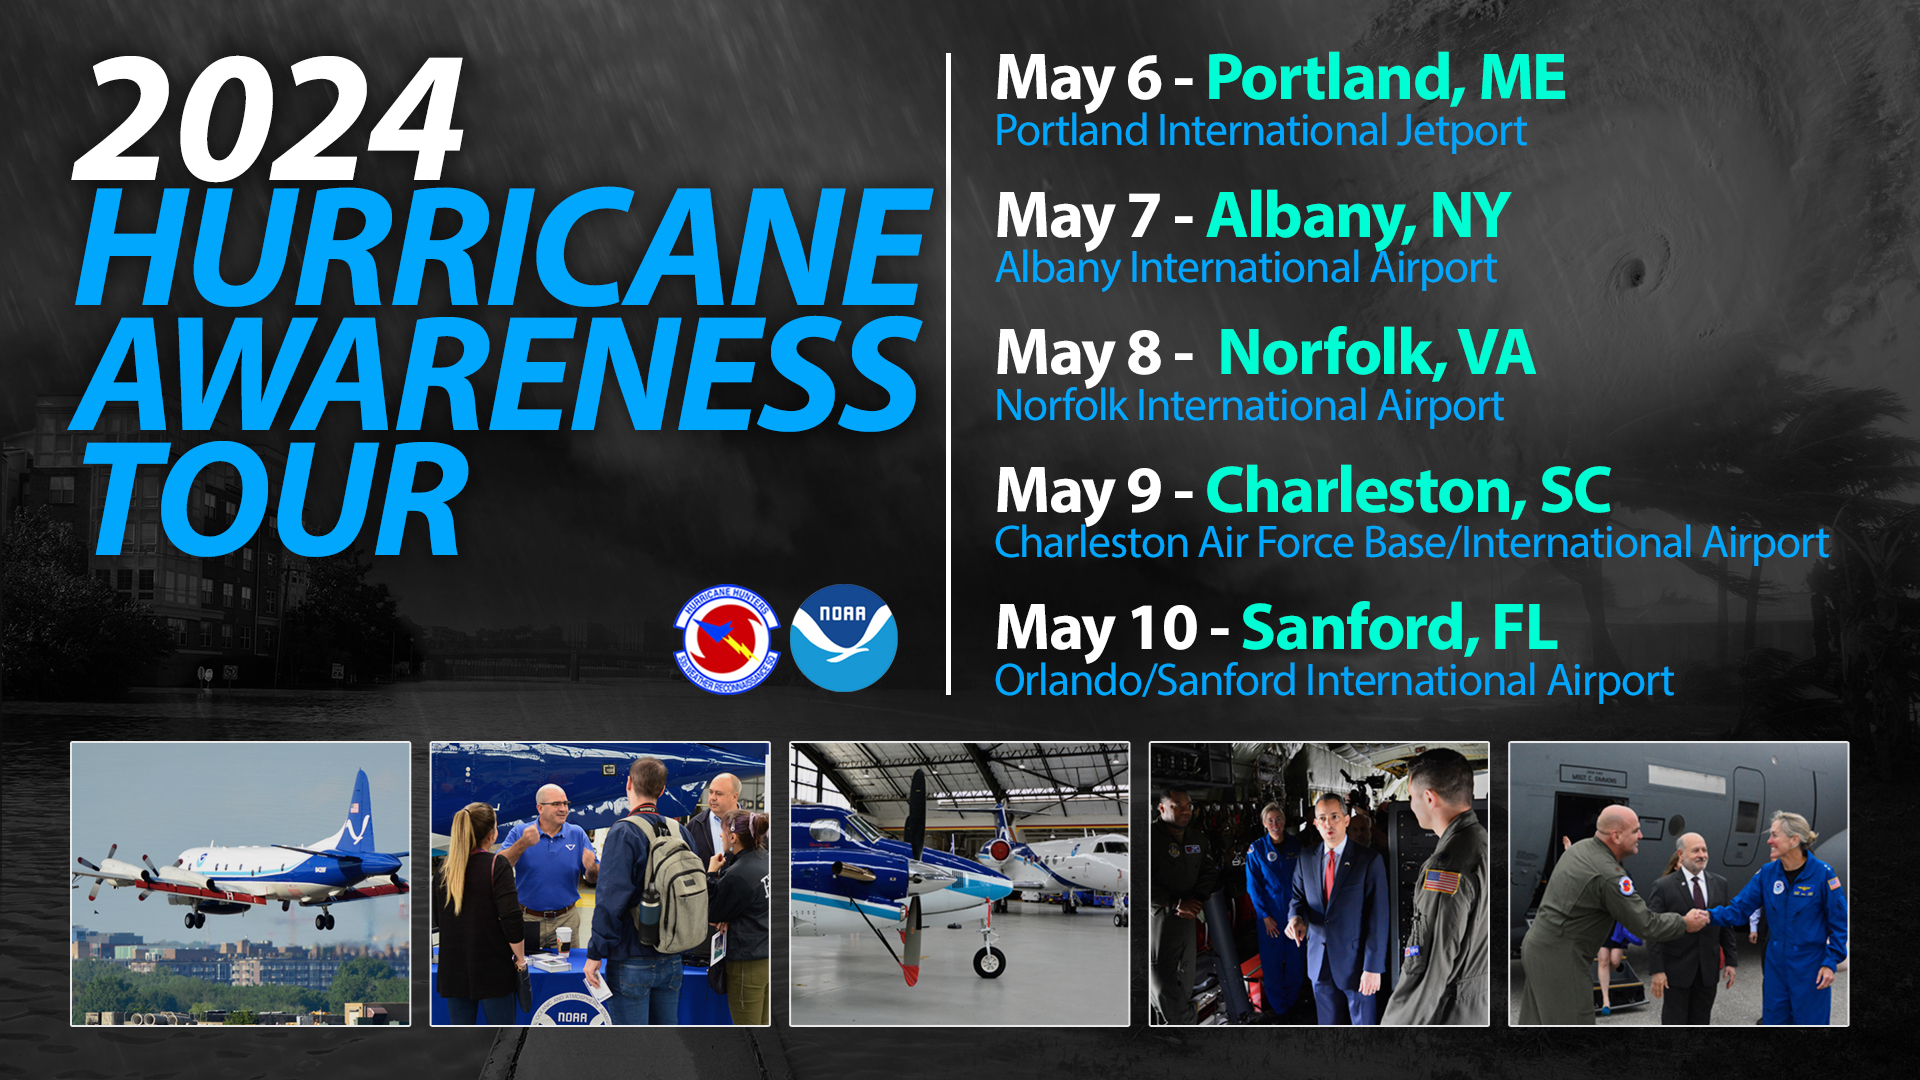 Image listing 2024 Hurricane Awareness Tour dates and locations. May 6 in Portland, Maine; May 7 in Albany, New York; May 8 in Norfolk, Virginia; May 9 in Charleston, South Carolina; and May 10 in Sanford, Florida. 